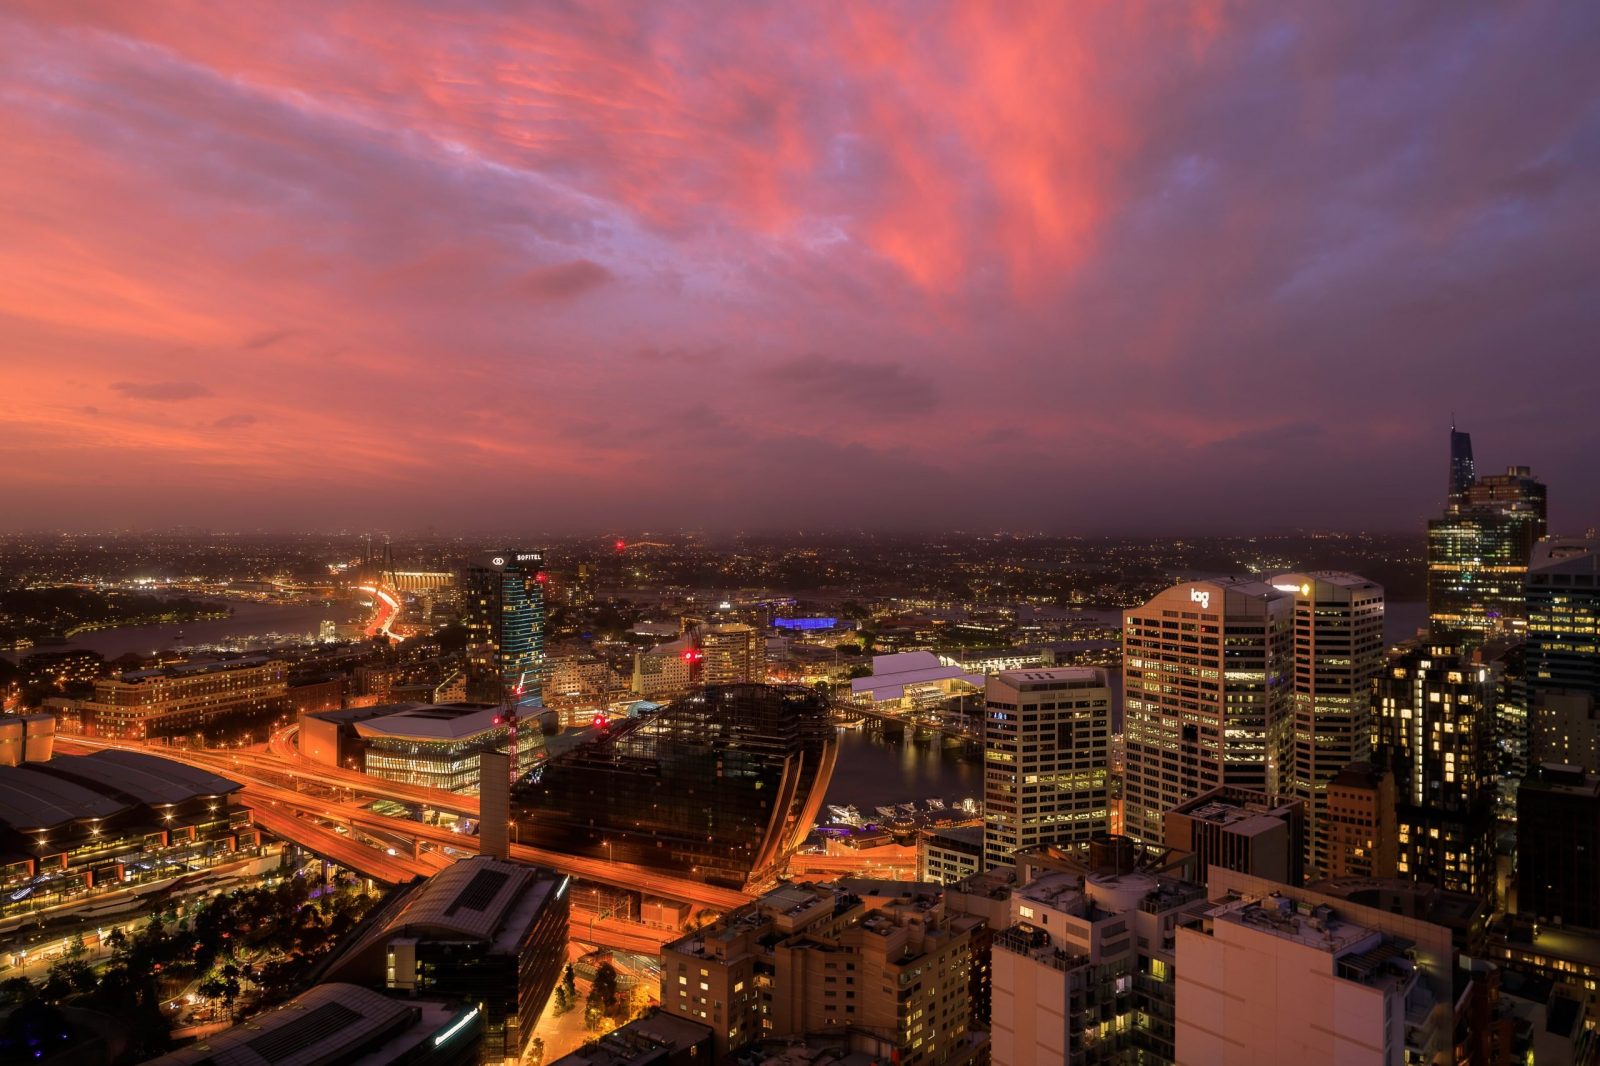 Darling Harbour, Sydney, taken with the Canon 5D4 outside the Balcony of Meriton Suites, Kent Street, Australia.